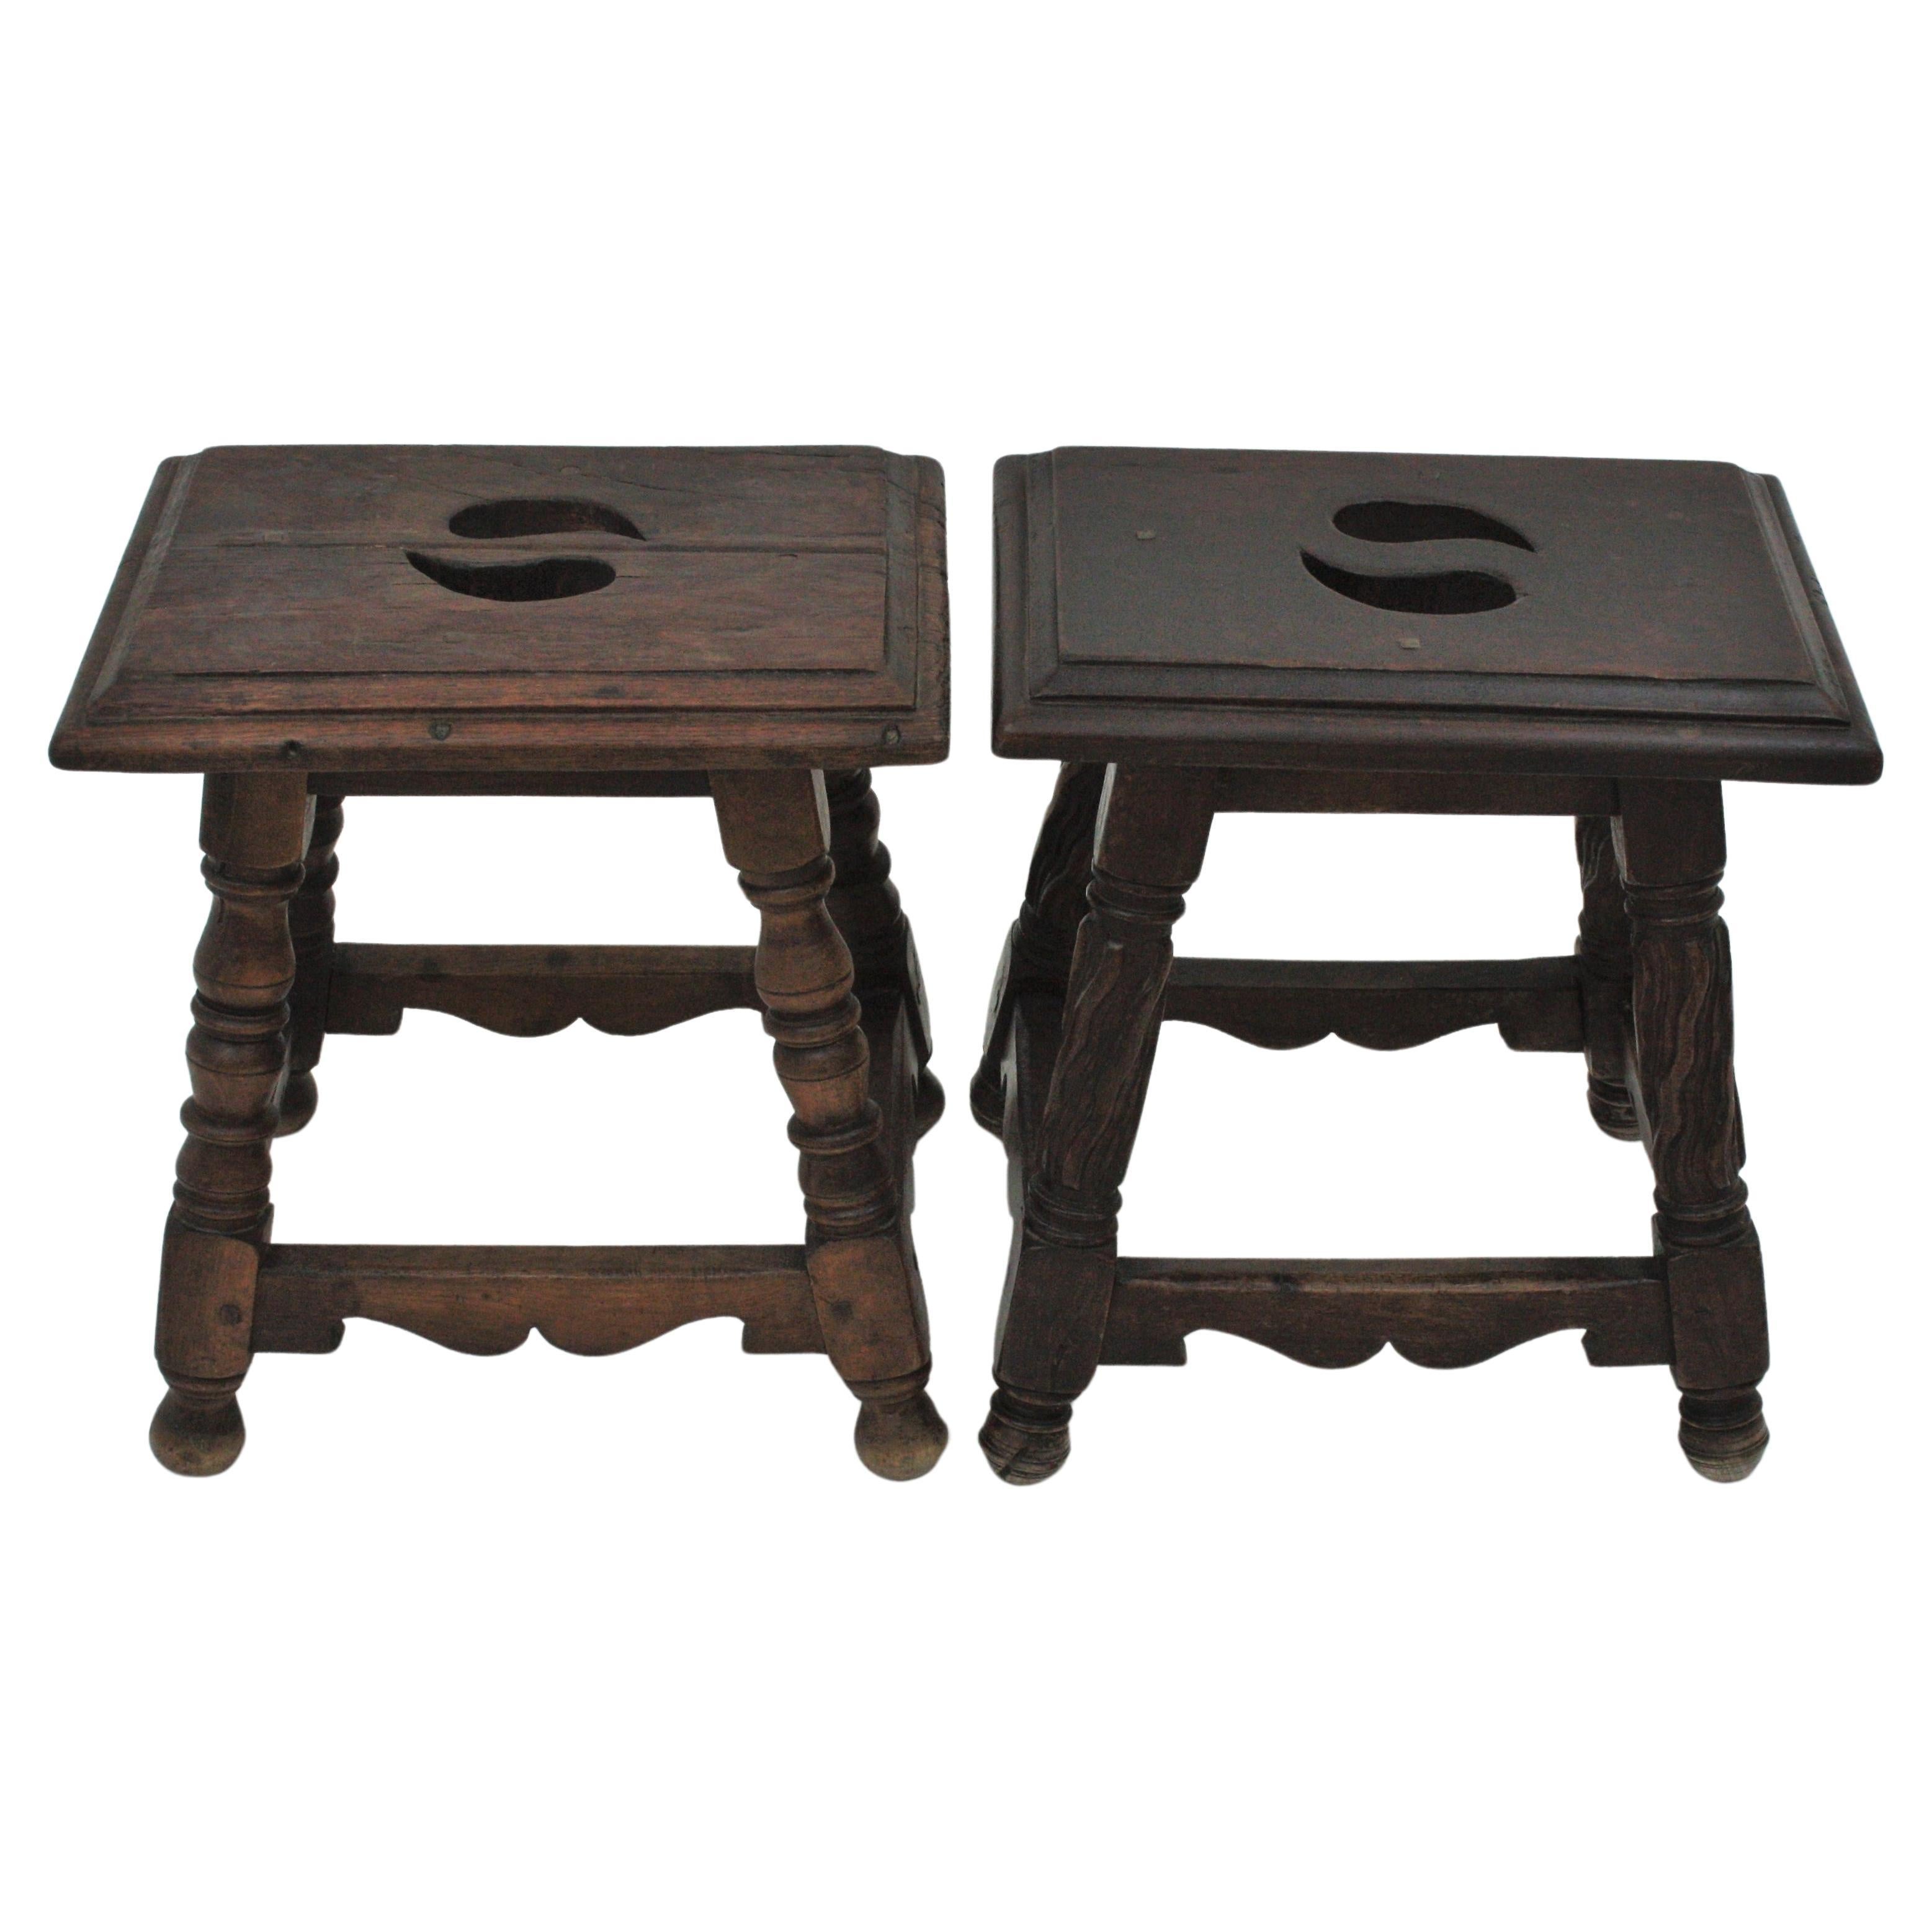 Unmatching pair of stools / side tables in walnut wood,  Spain, 1940s.
These stools feature rectangular tops supported on turned legs with different design. Both tops are adorned by tear drop shaped cut holes and wood nails. 
They are very versatile